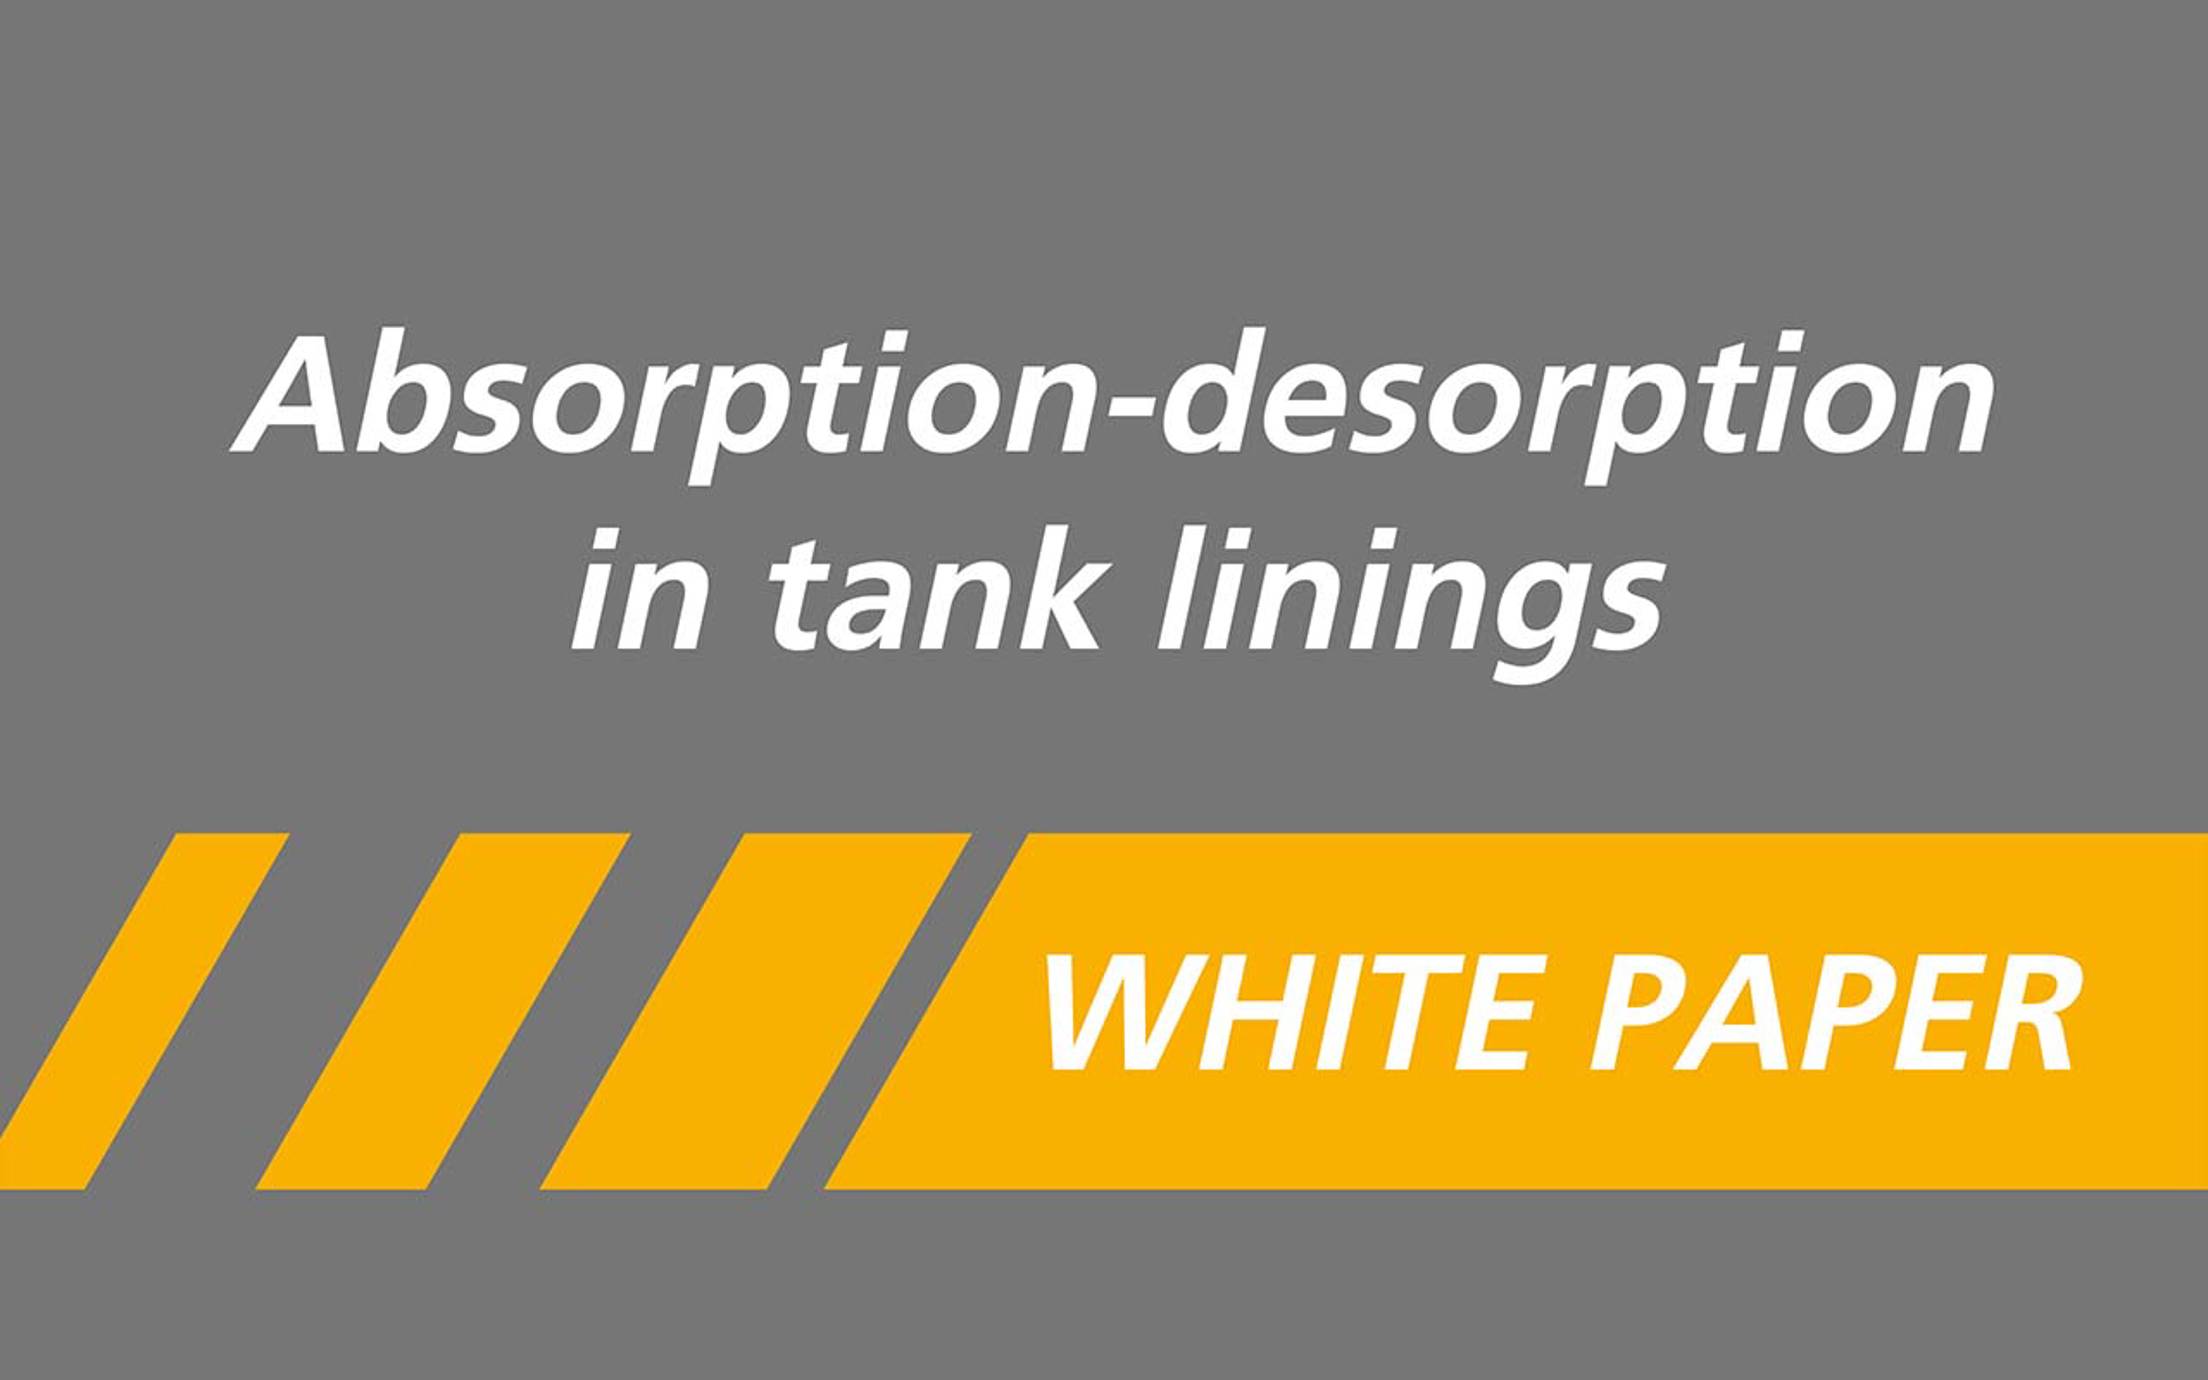 Image showing title of white paper called Absorption-desorption in tank linings by Jotun